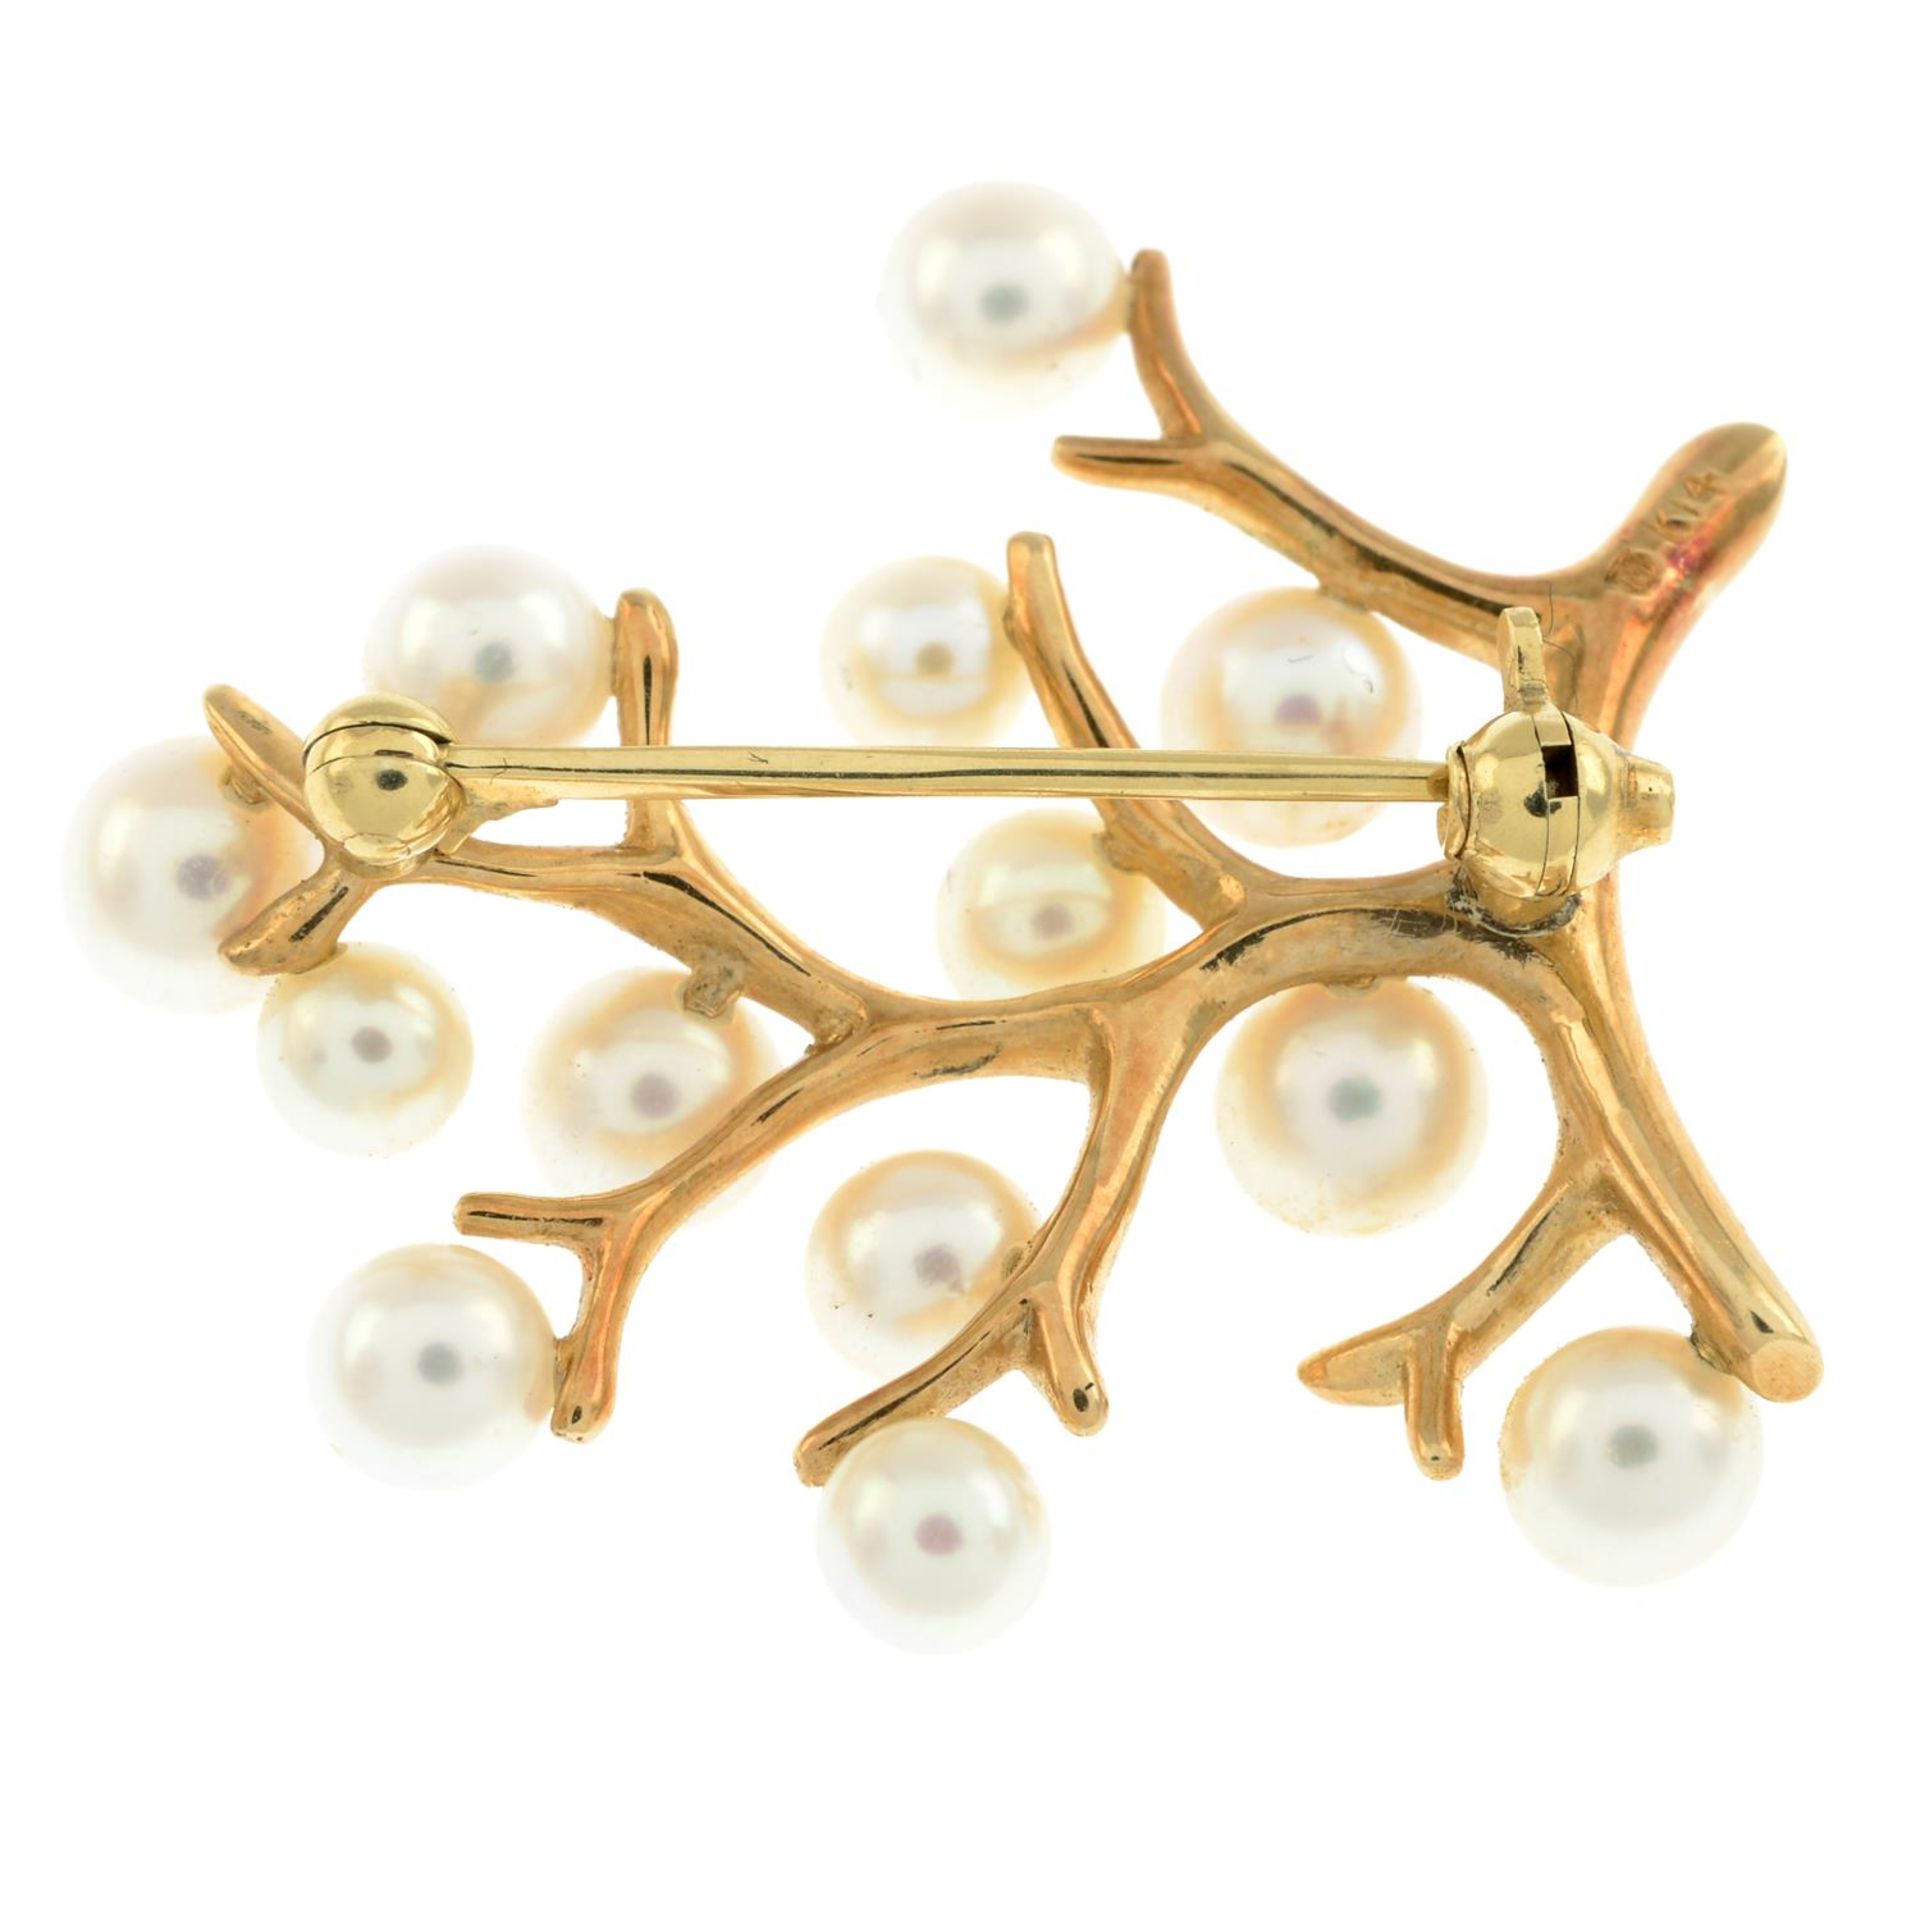 Cultured pearl 'Tree of Life' brooch, by Mikimoto - Image 3 of 4